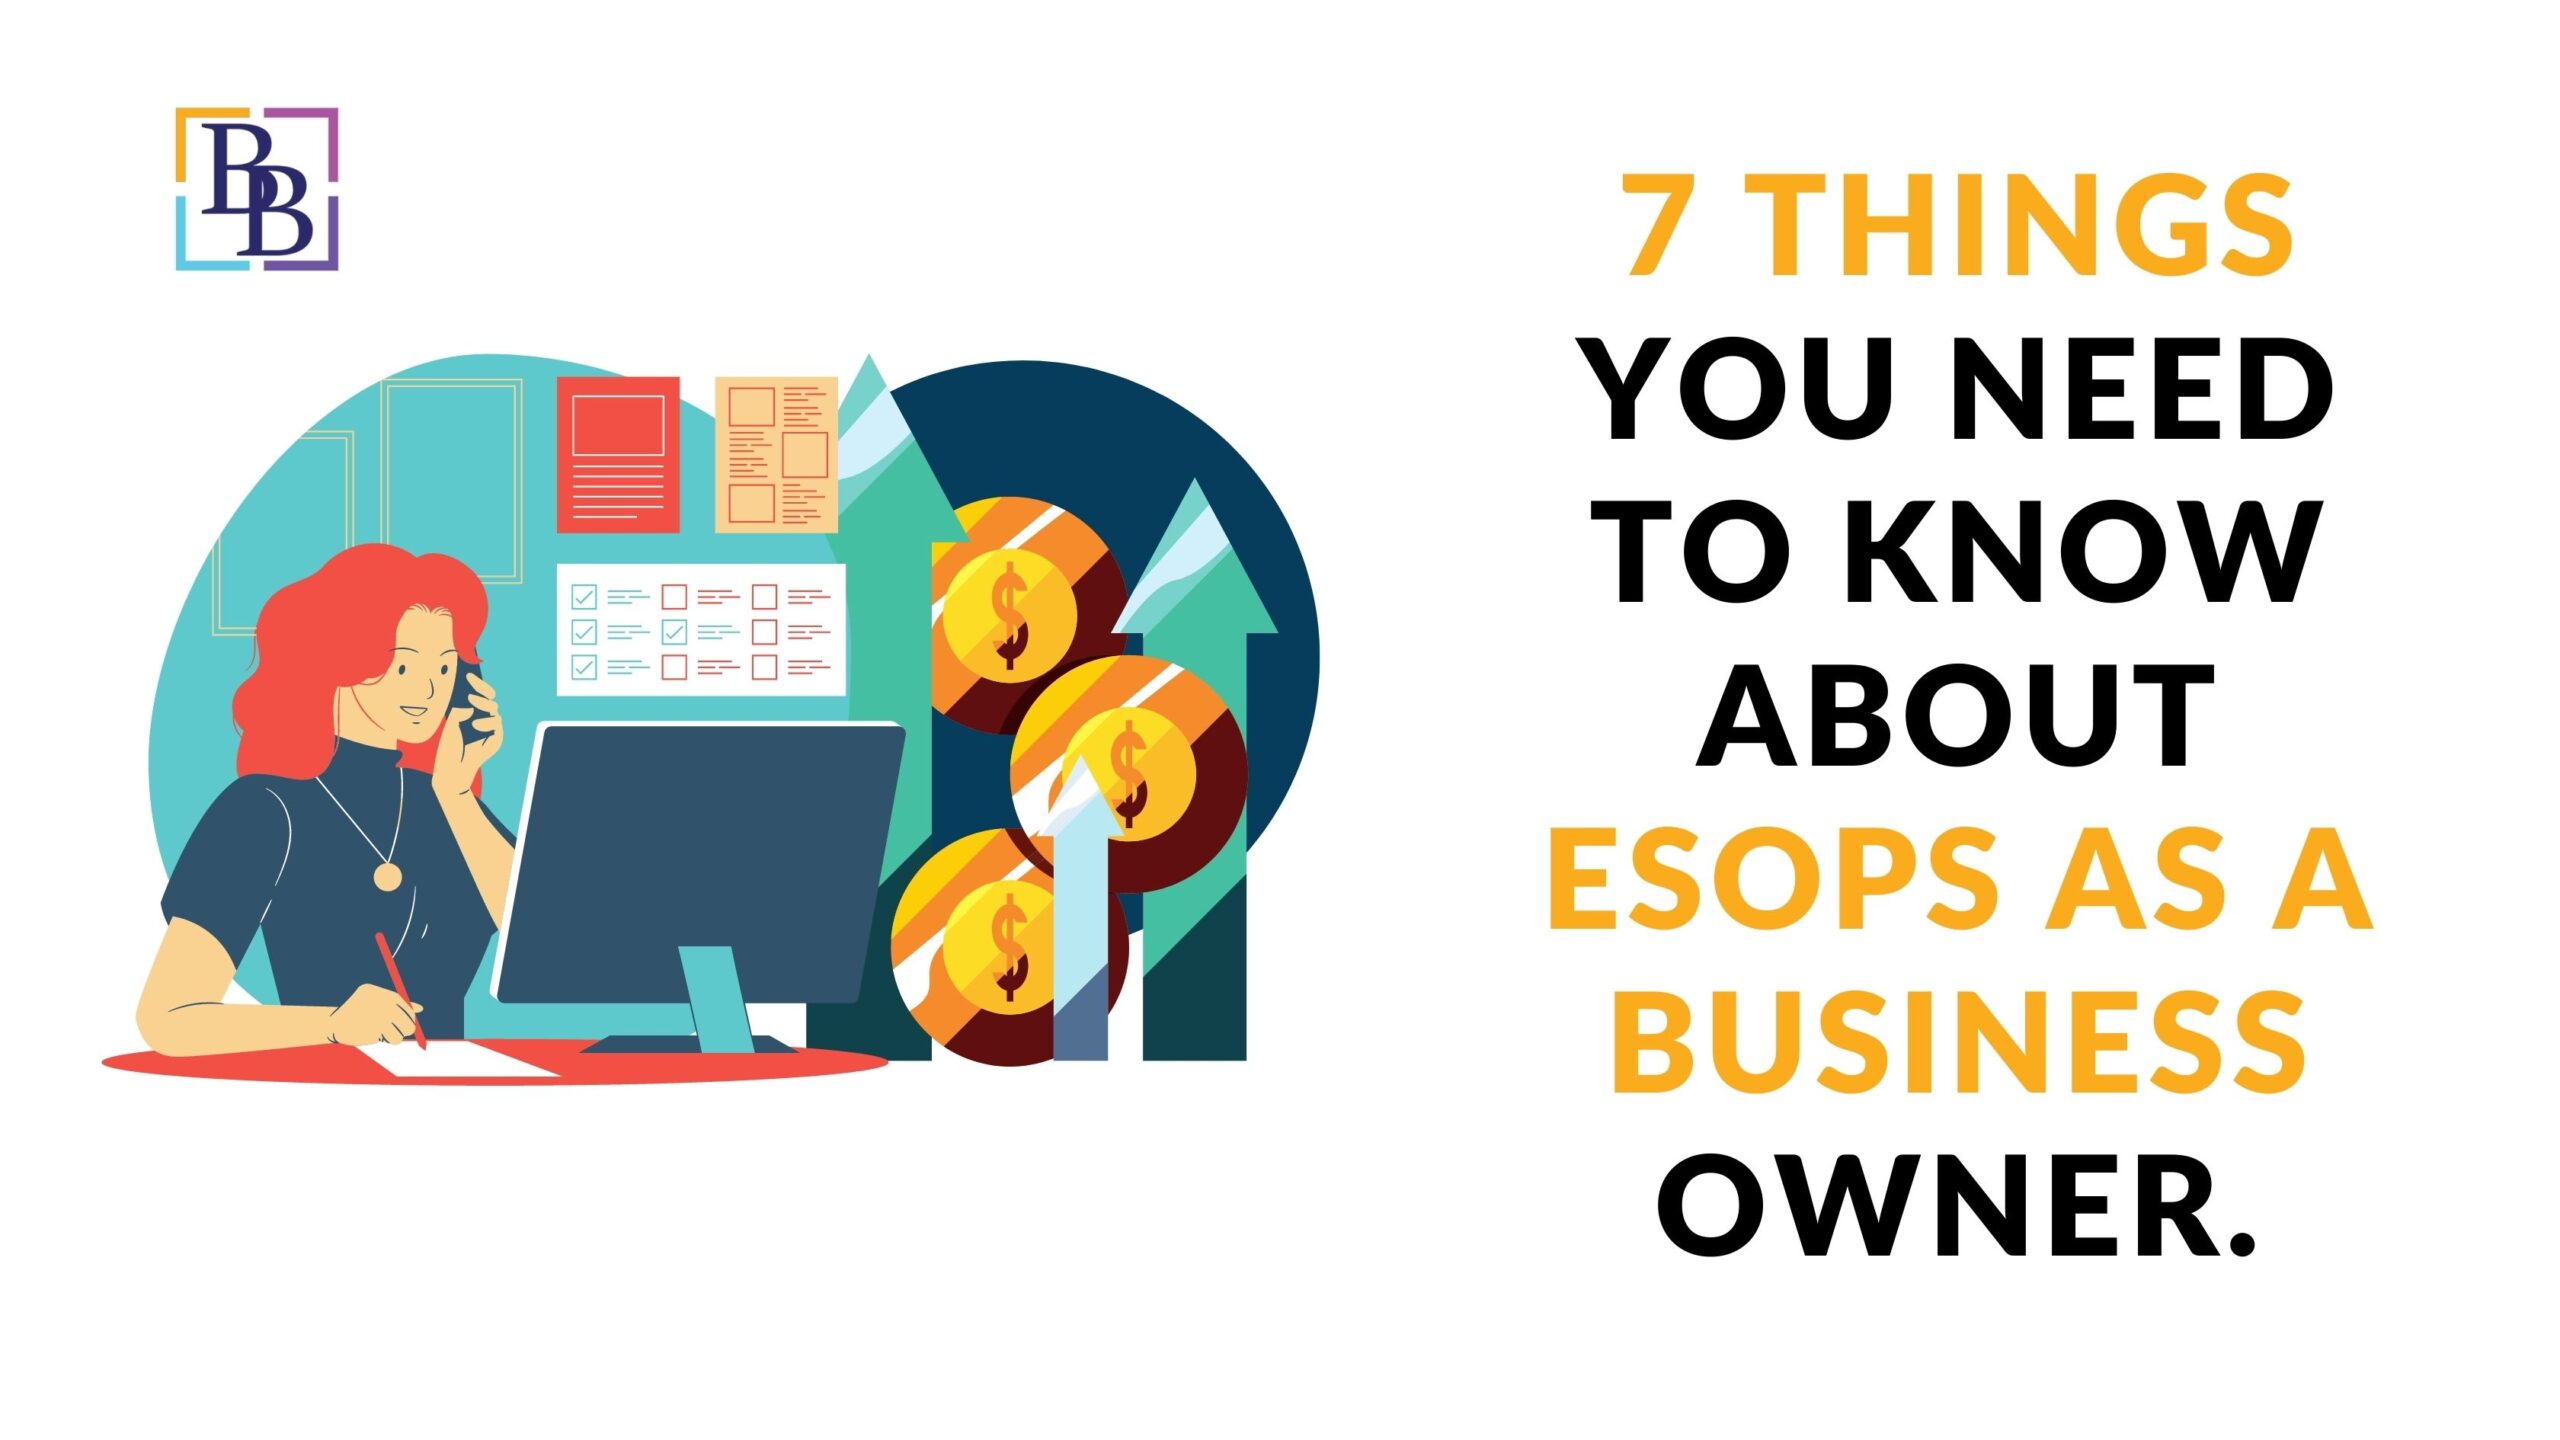 Things you need to know about ESOPs